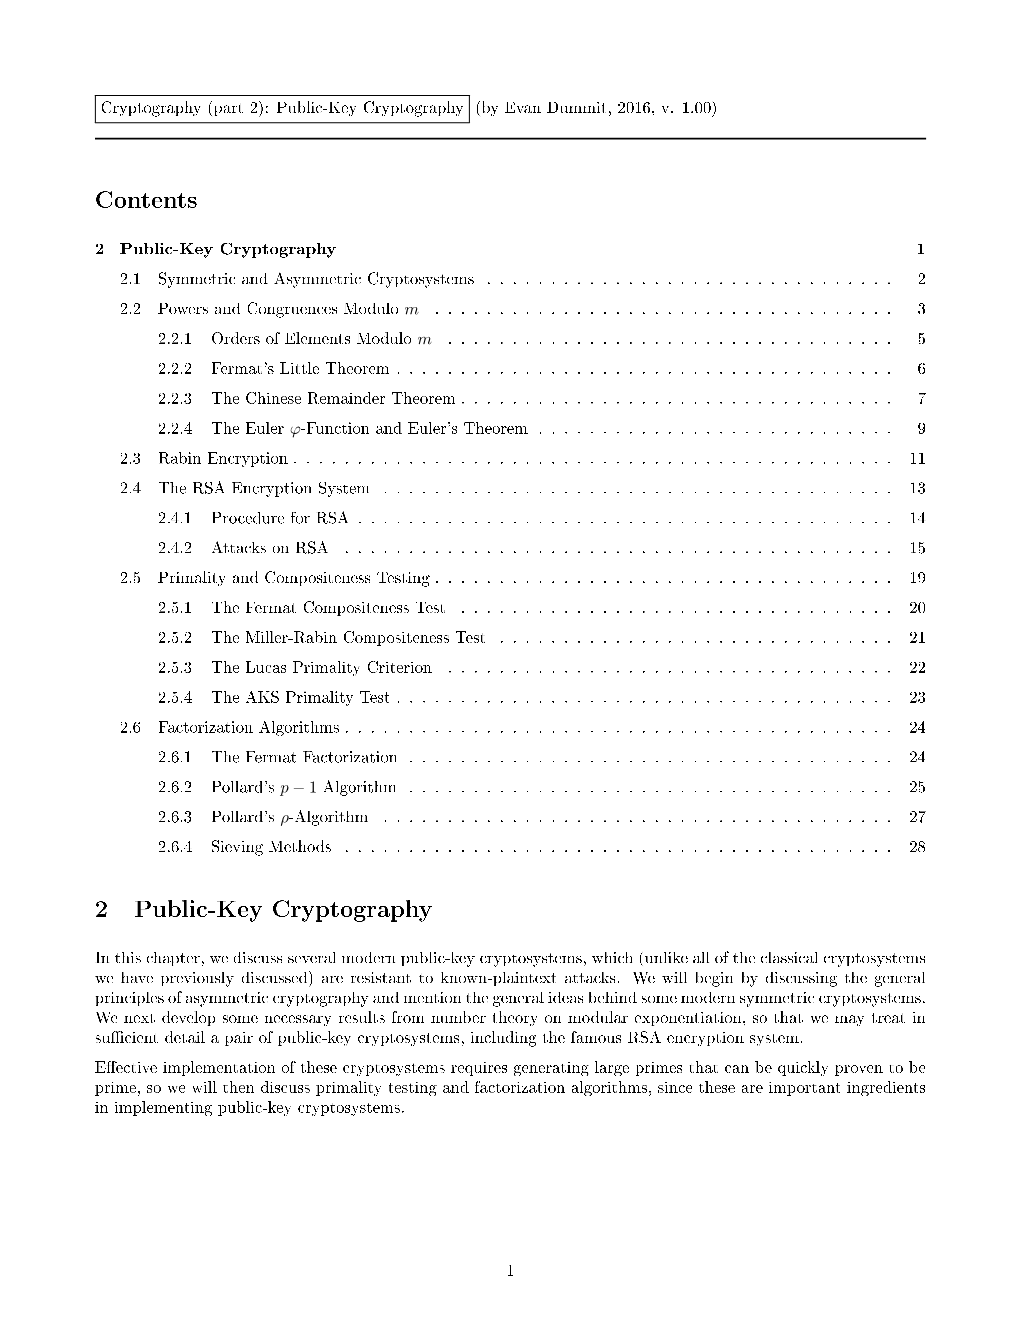 Contents 2 Public-Key Cryptography